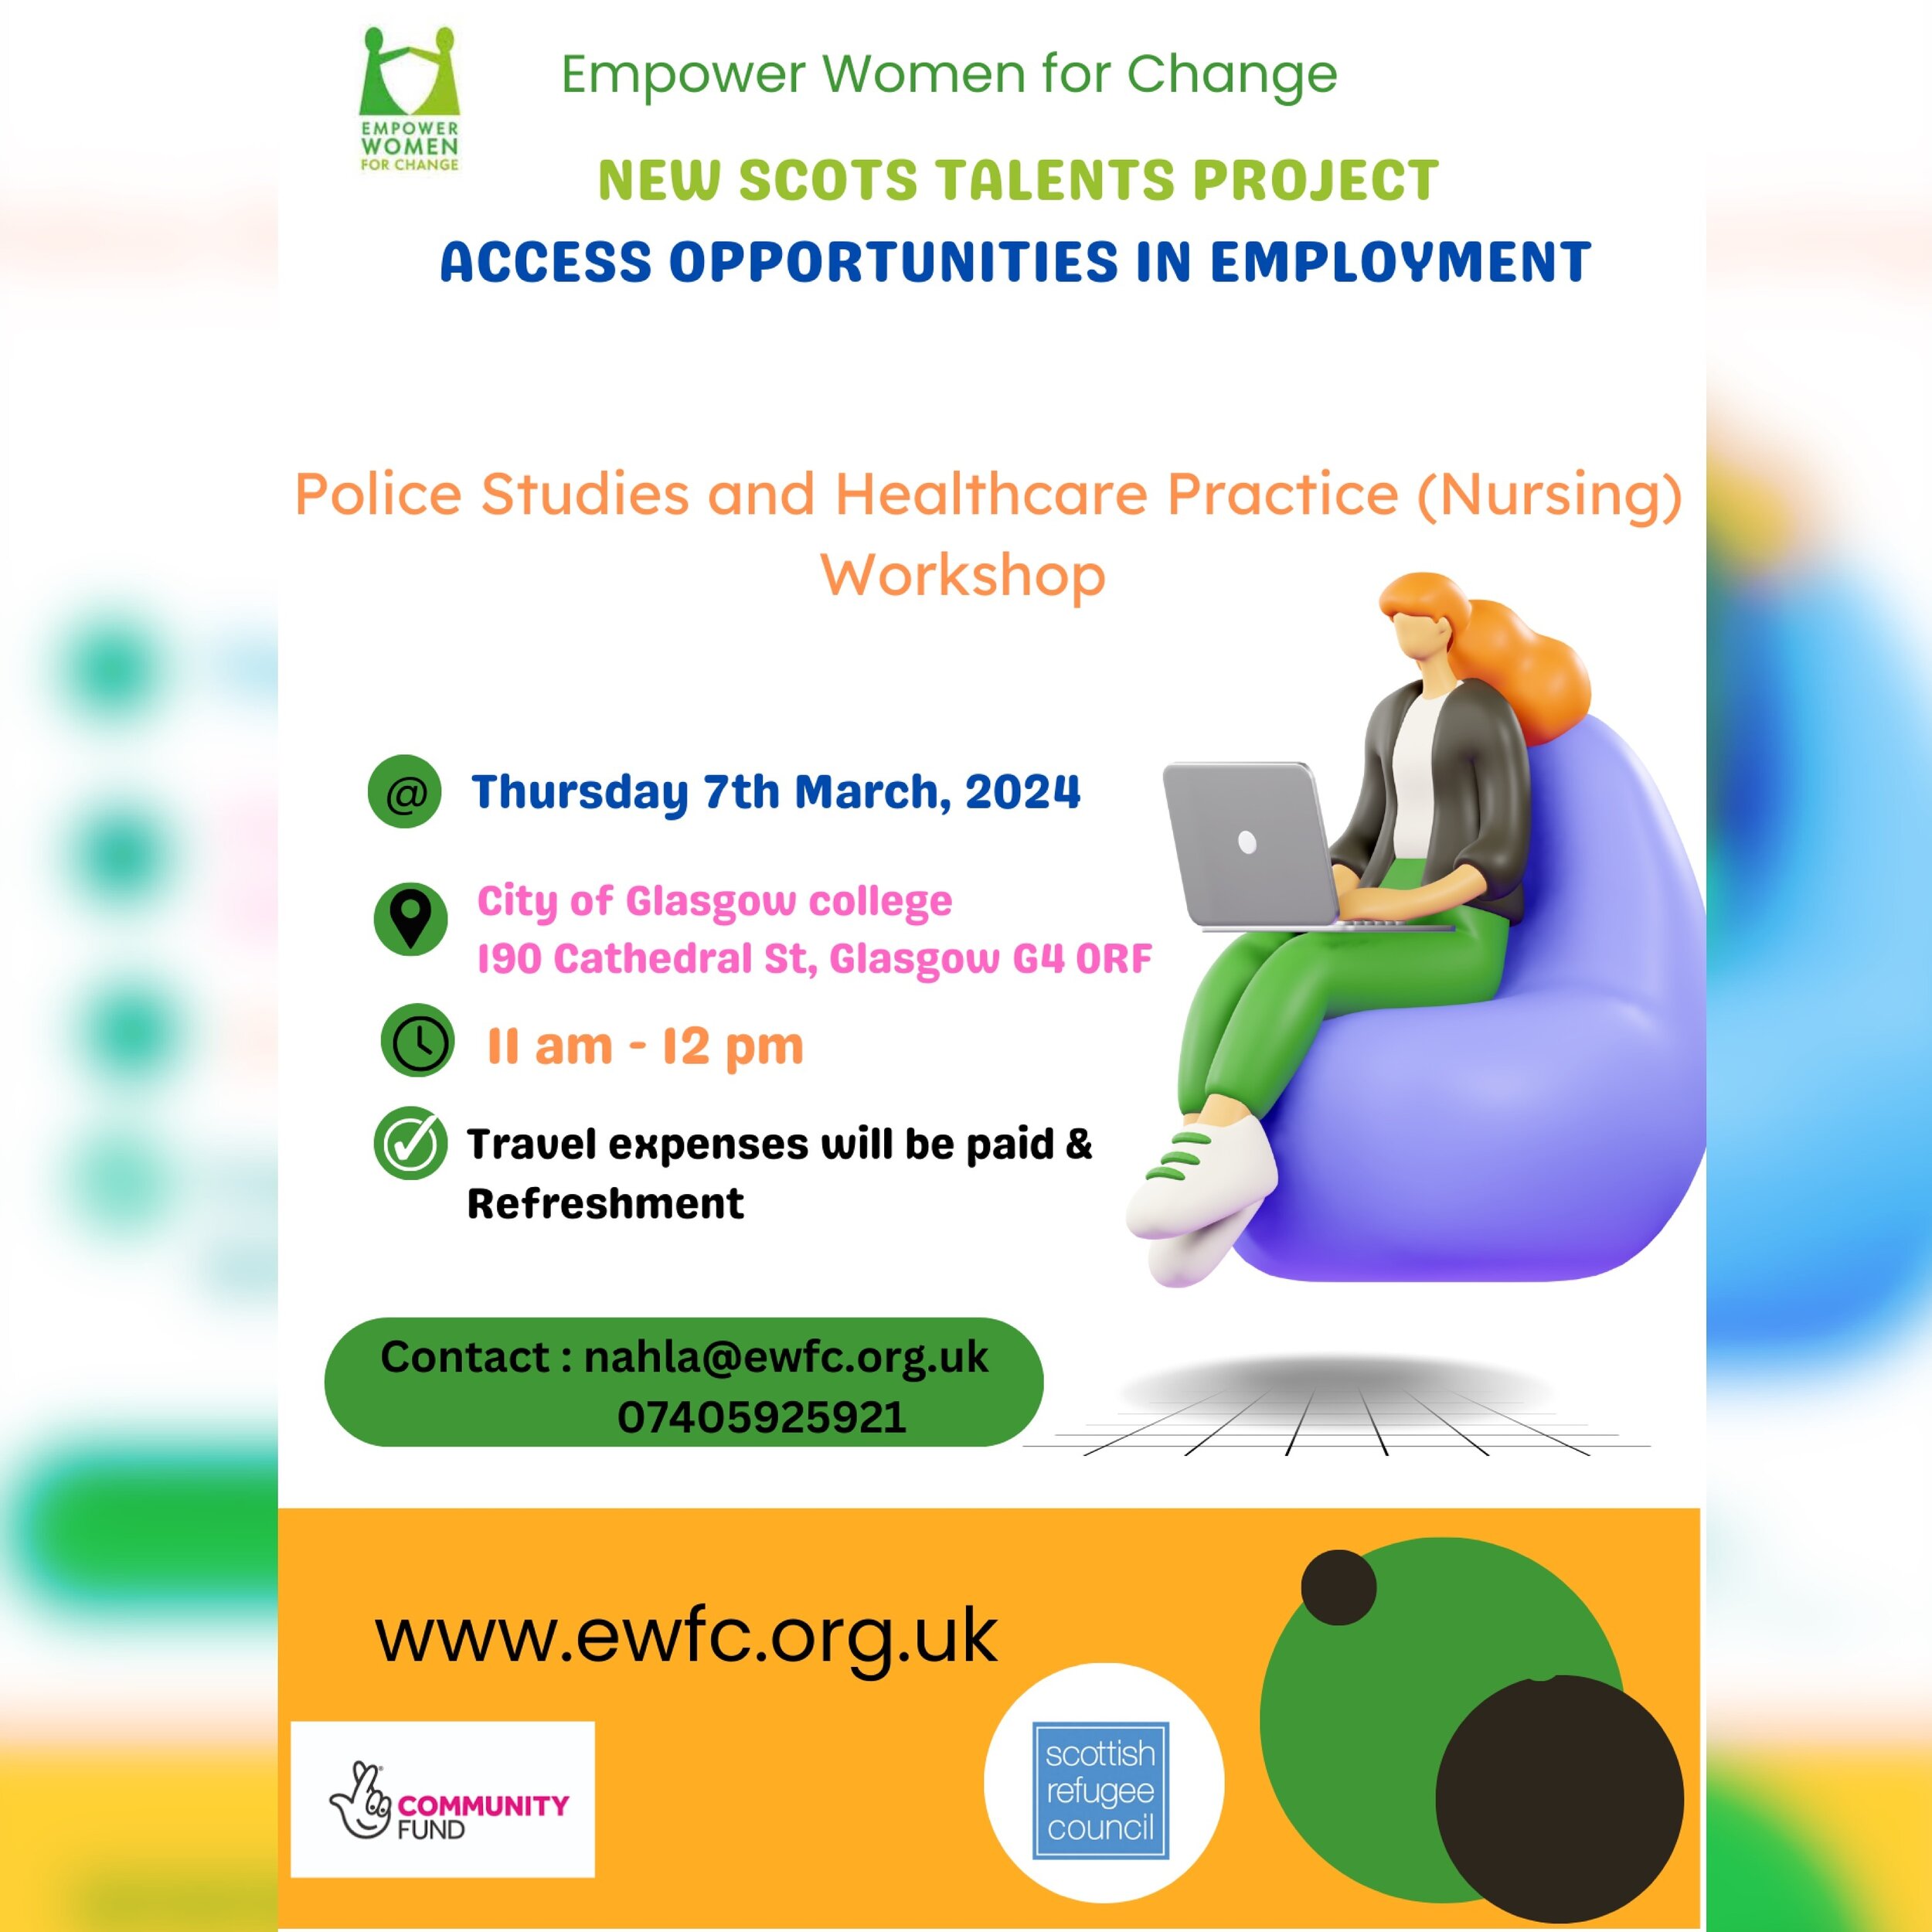 Upcoming workshop!! 

Join us on Thursday 7th March at the City of Glasgow College for a Police Studies and Healthcare Practice workshop! 🩺

Contact nahla@ewfc.org.uk to sign up or call us on +447405925921 

#empowerwomen #empowerwomenforchange #ewf